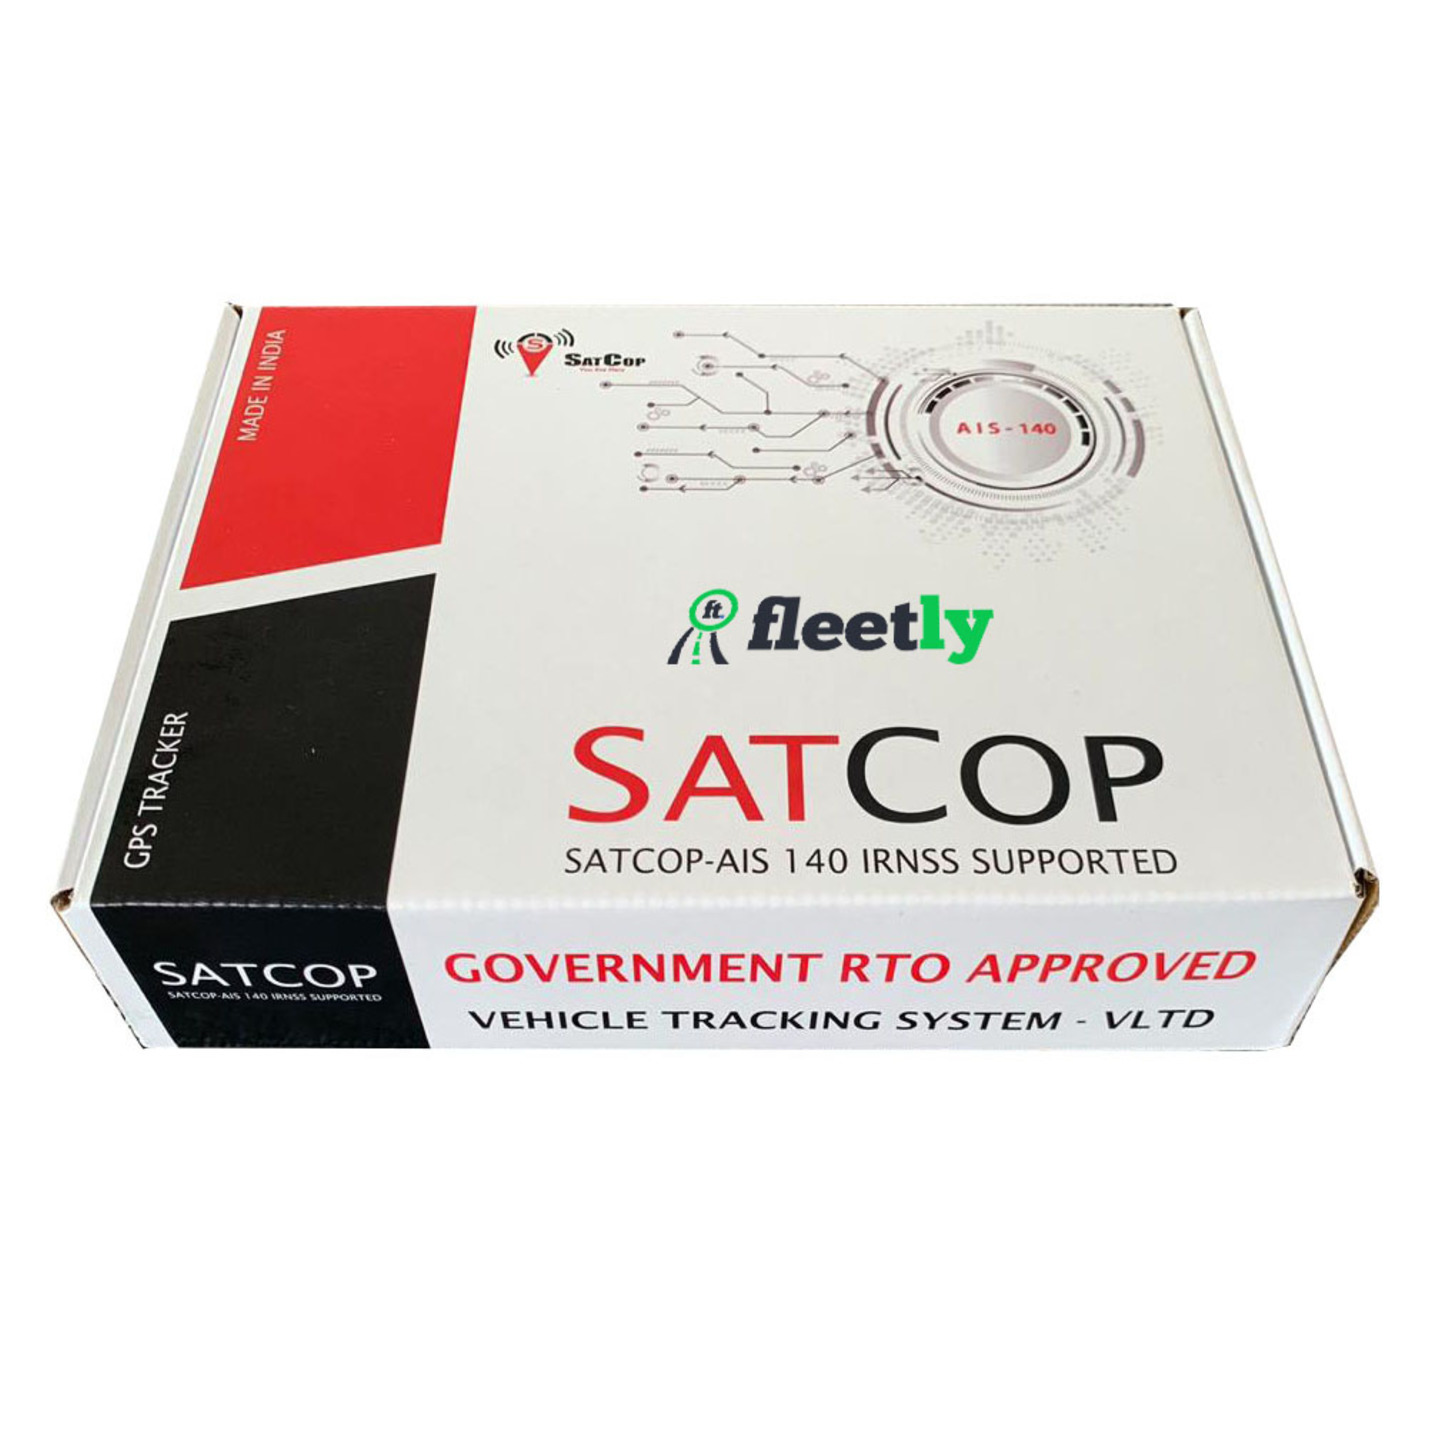 AIS-140 Vehicle Tracking with SATCOP GPS Tracker and Fleetly Tracking platform